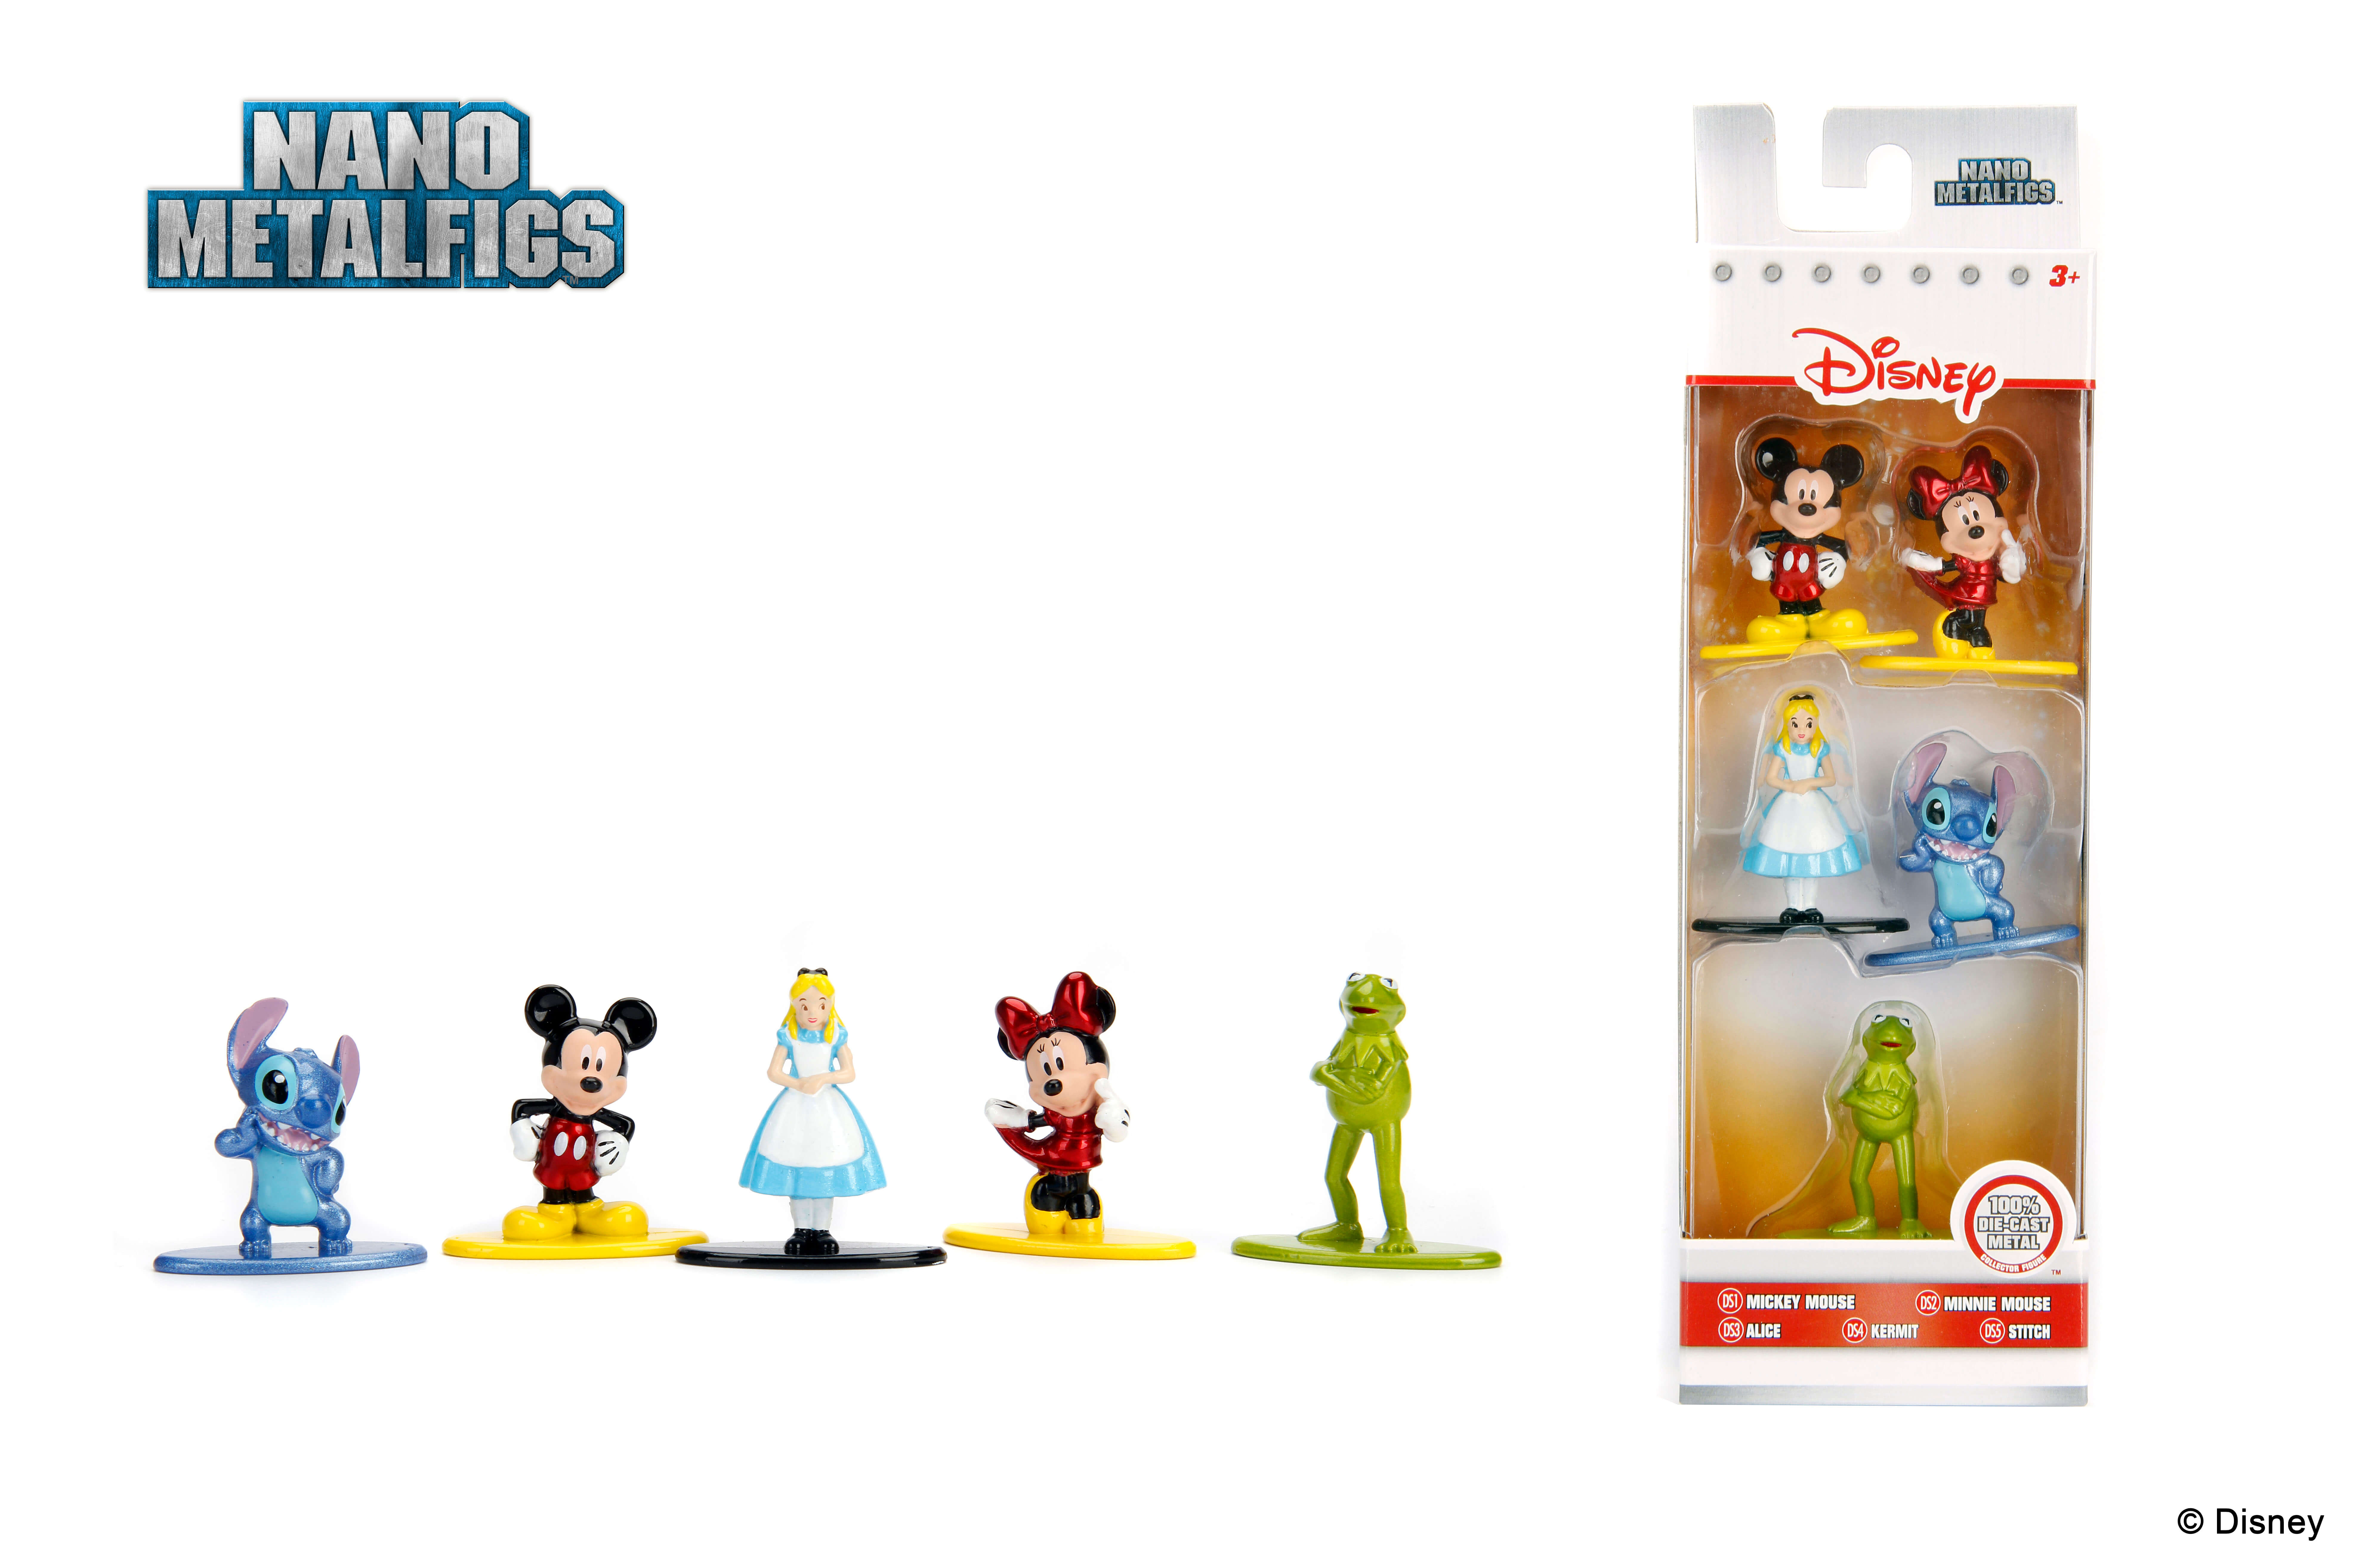 Details about   Disney Nano MetalFigs 100% Die-Cast Metal 5 Pack Figure Collector’s Set 2017 NEW 